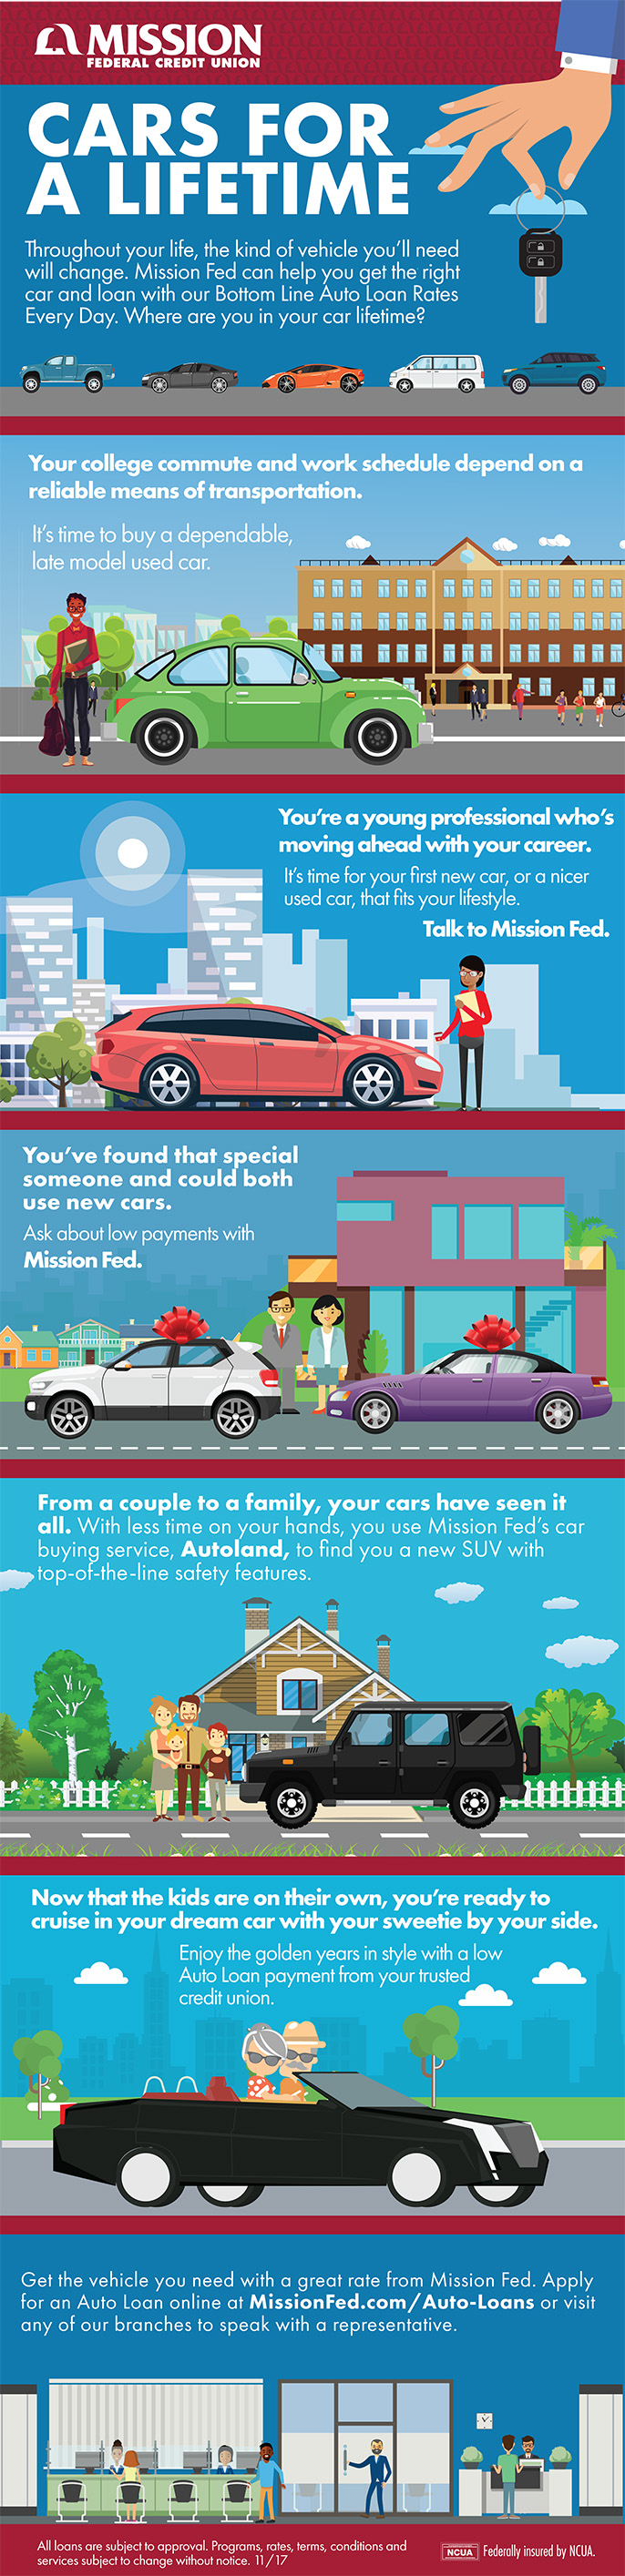 cars for a lifetime infographic